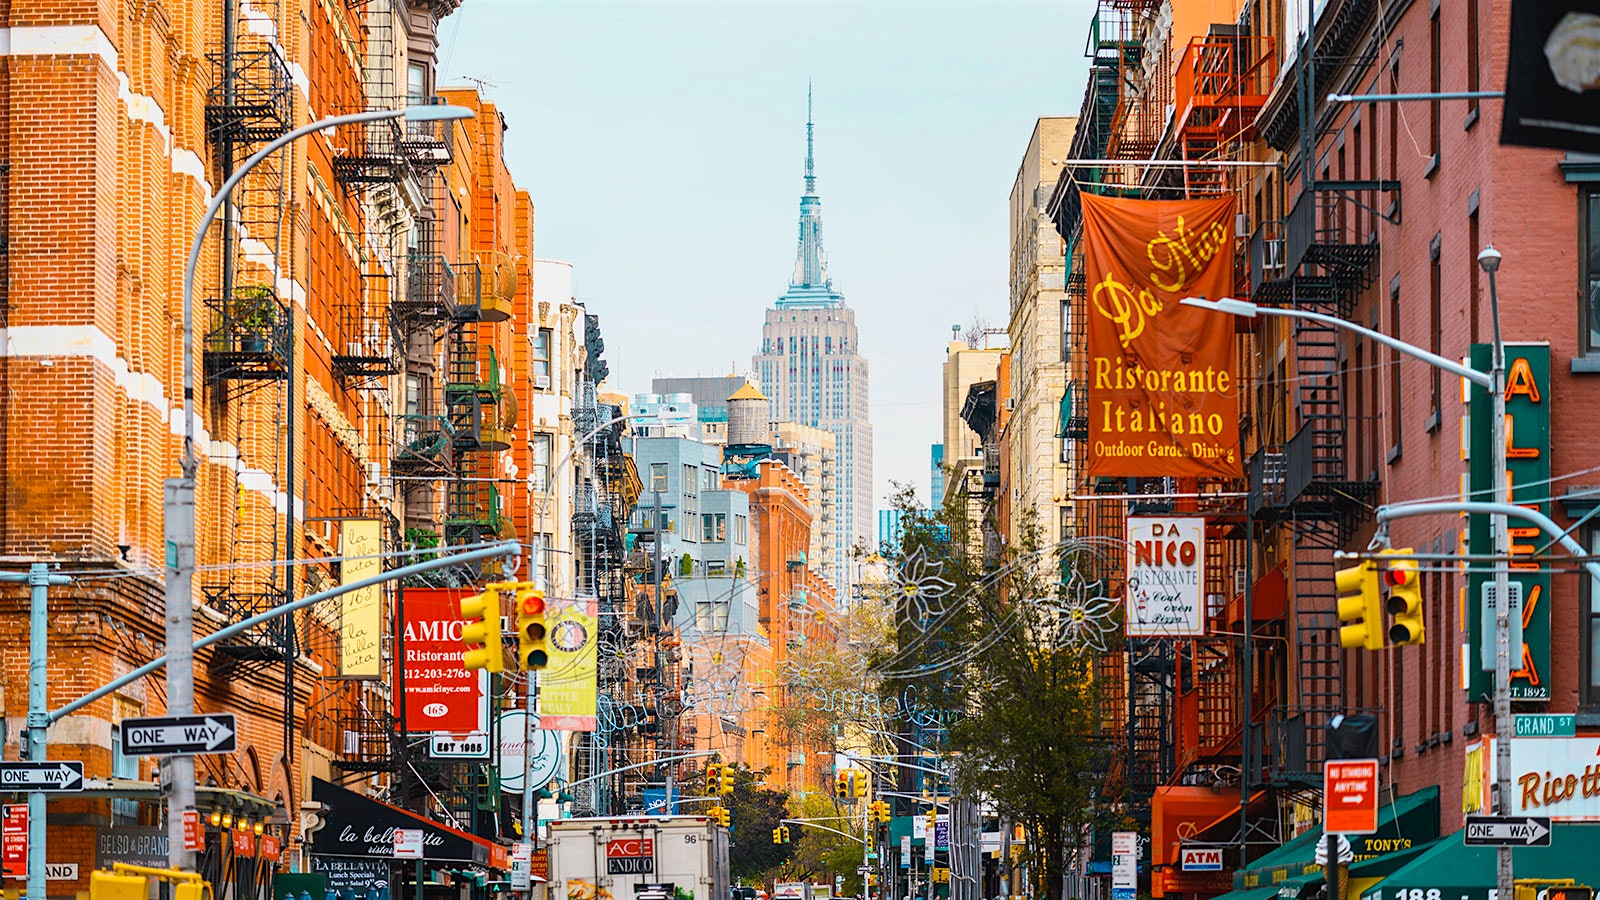  A street in New York City's Little Italy neighborhood, with the Empire State Building in the background